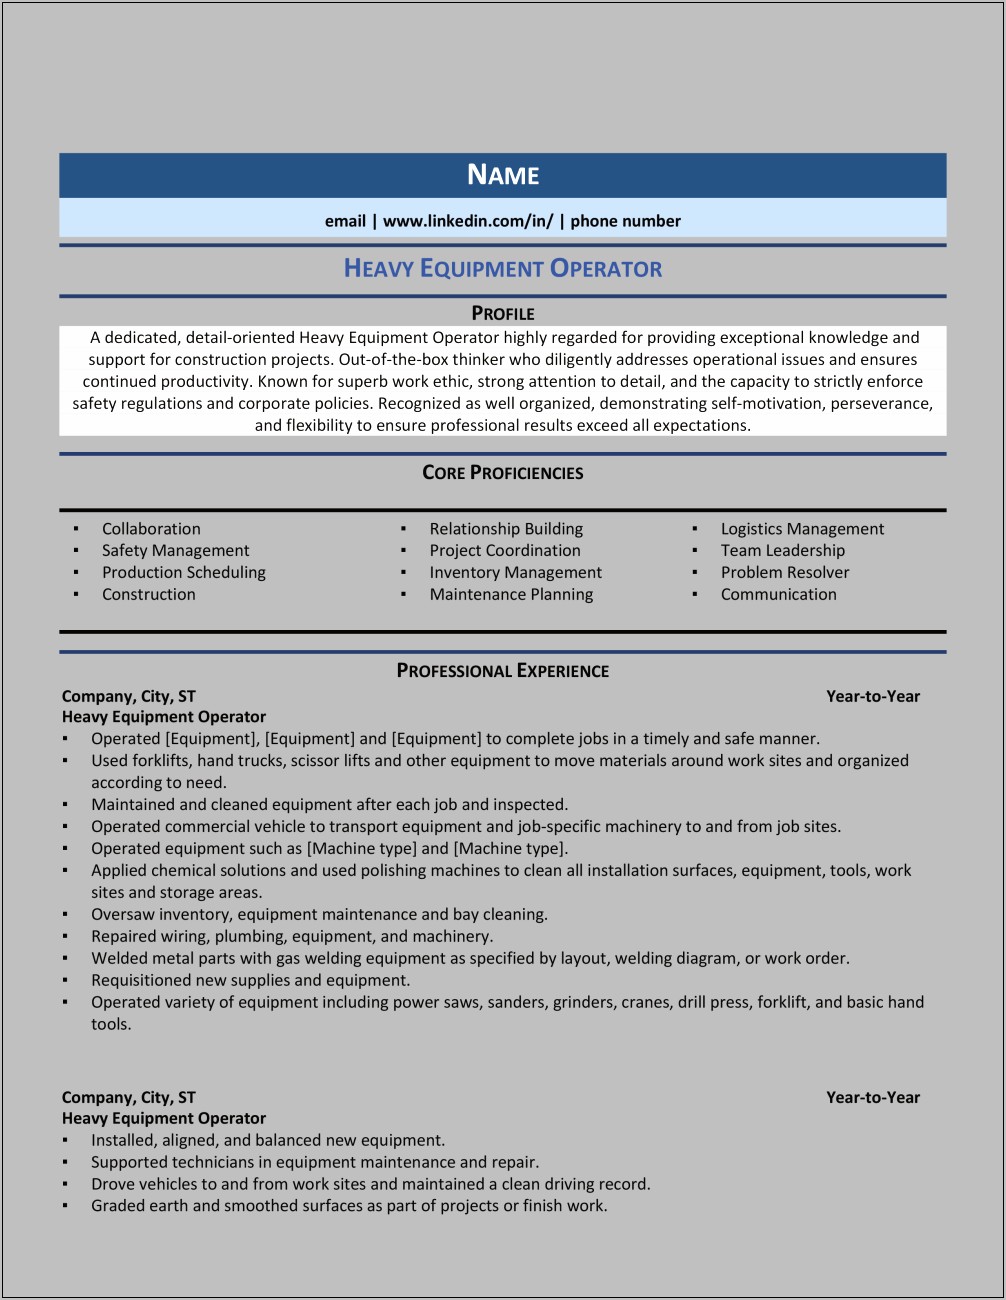 Examples Of A Operating Engineer Heavy Equipment Resume